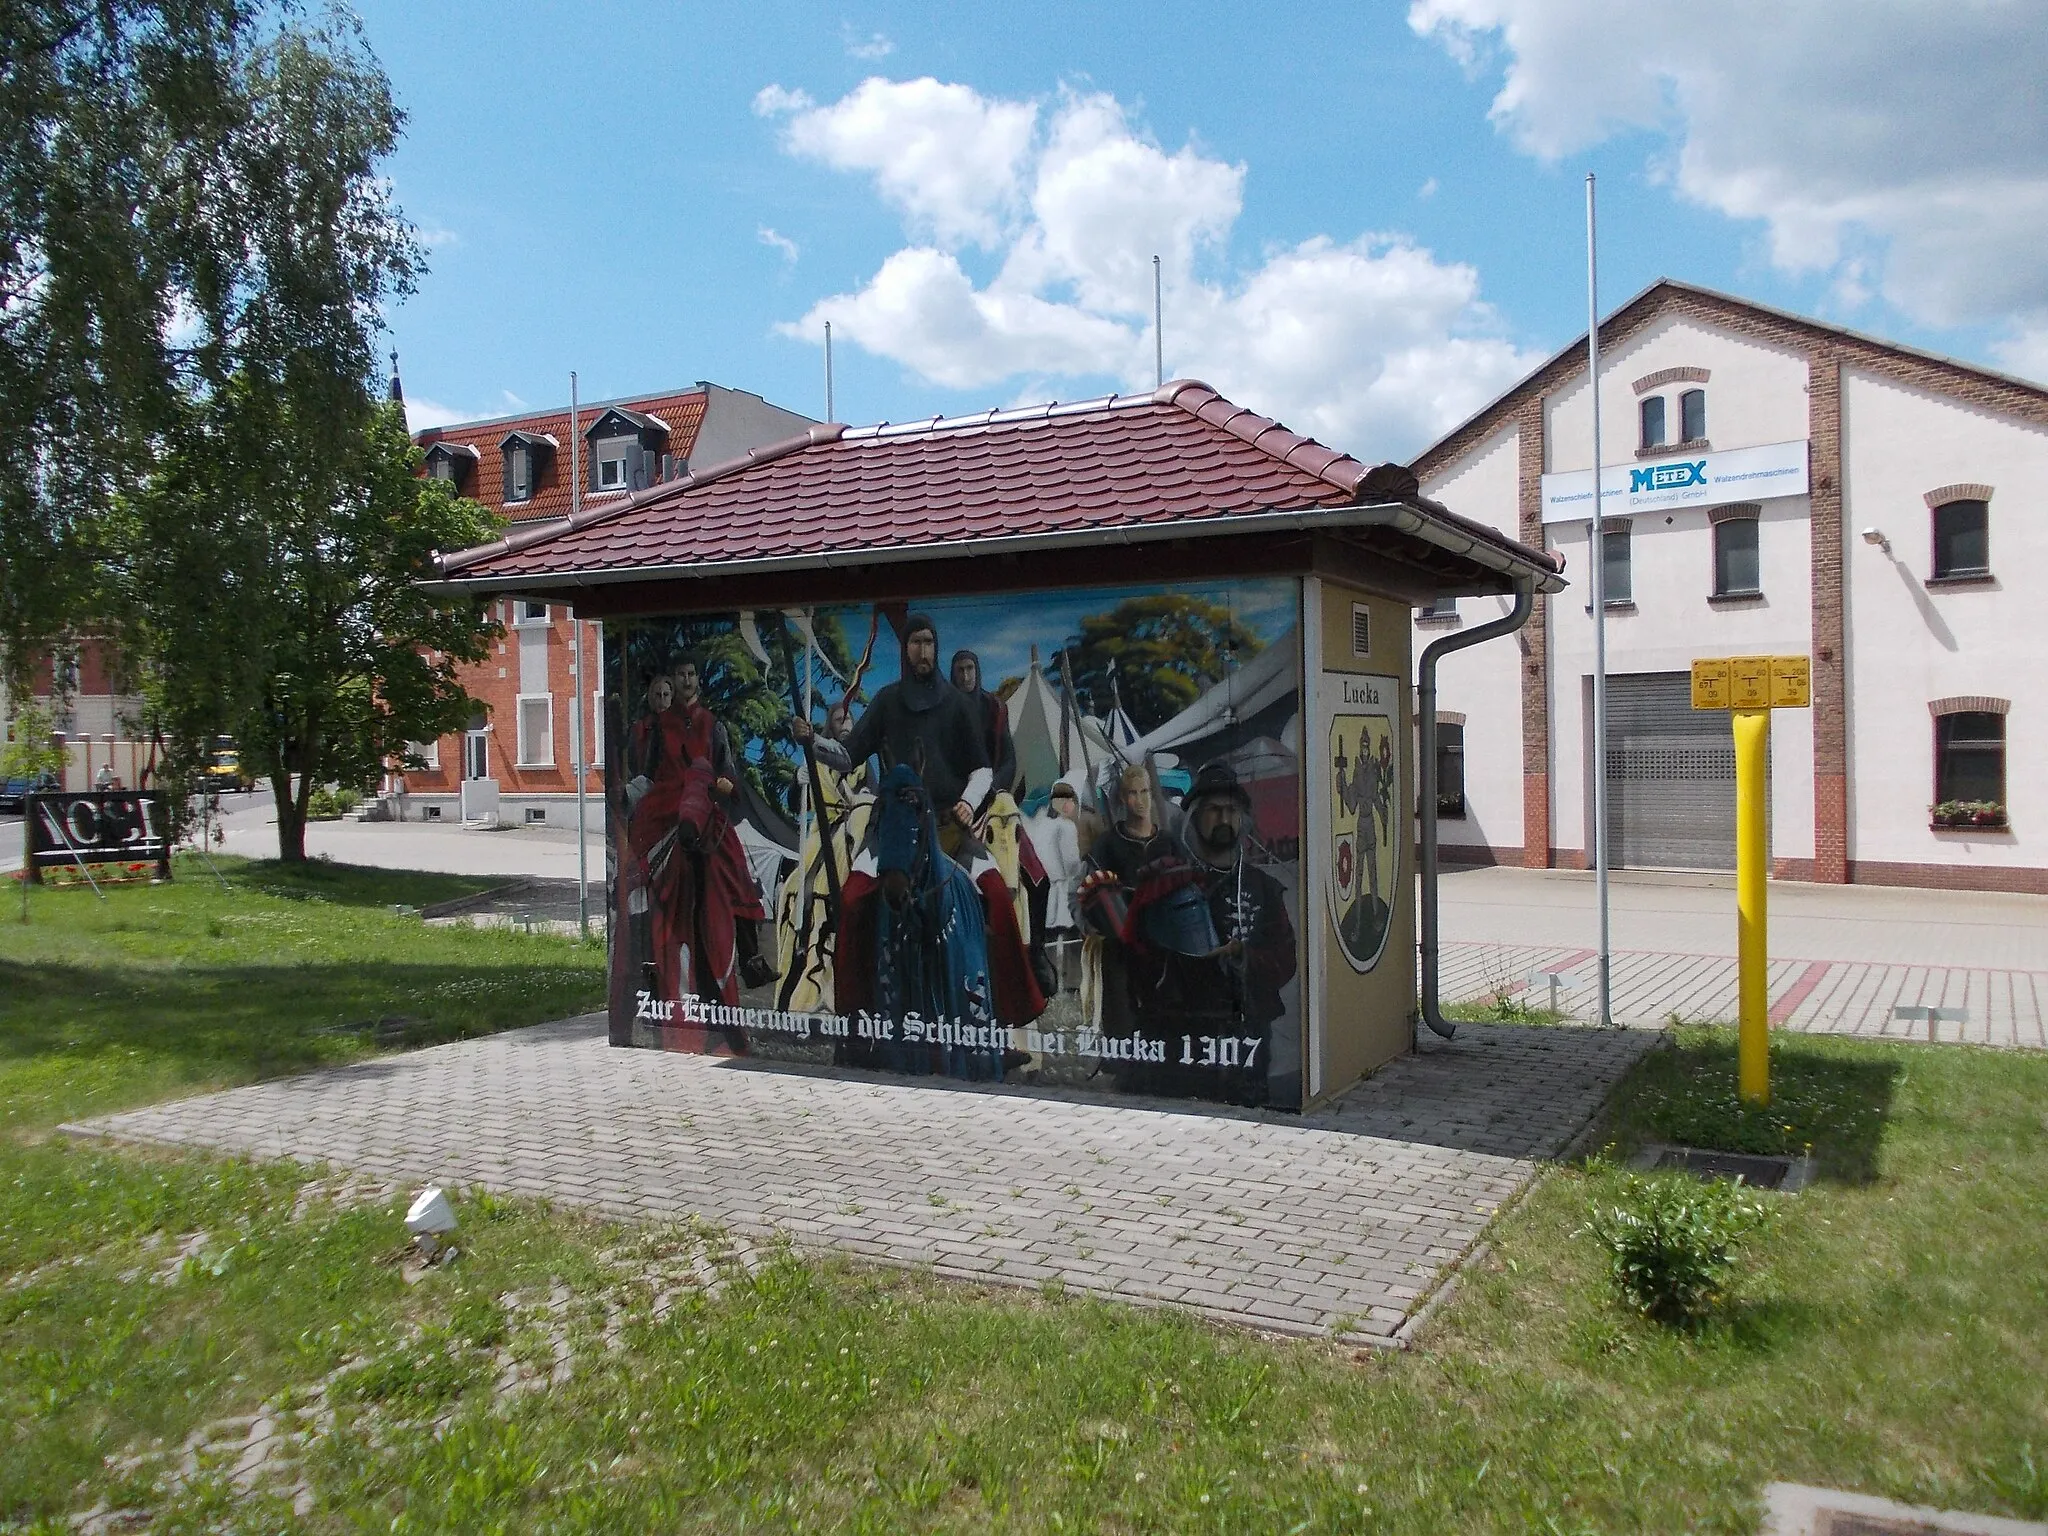 Photo showing: Mural in Lucka (district of Altenburger Land, Thuringia) in commemoration of the Battle of Lucka in 1307